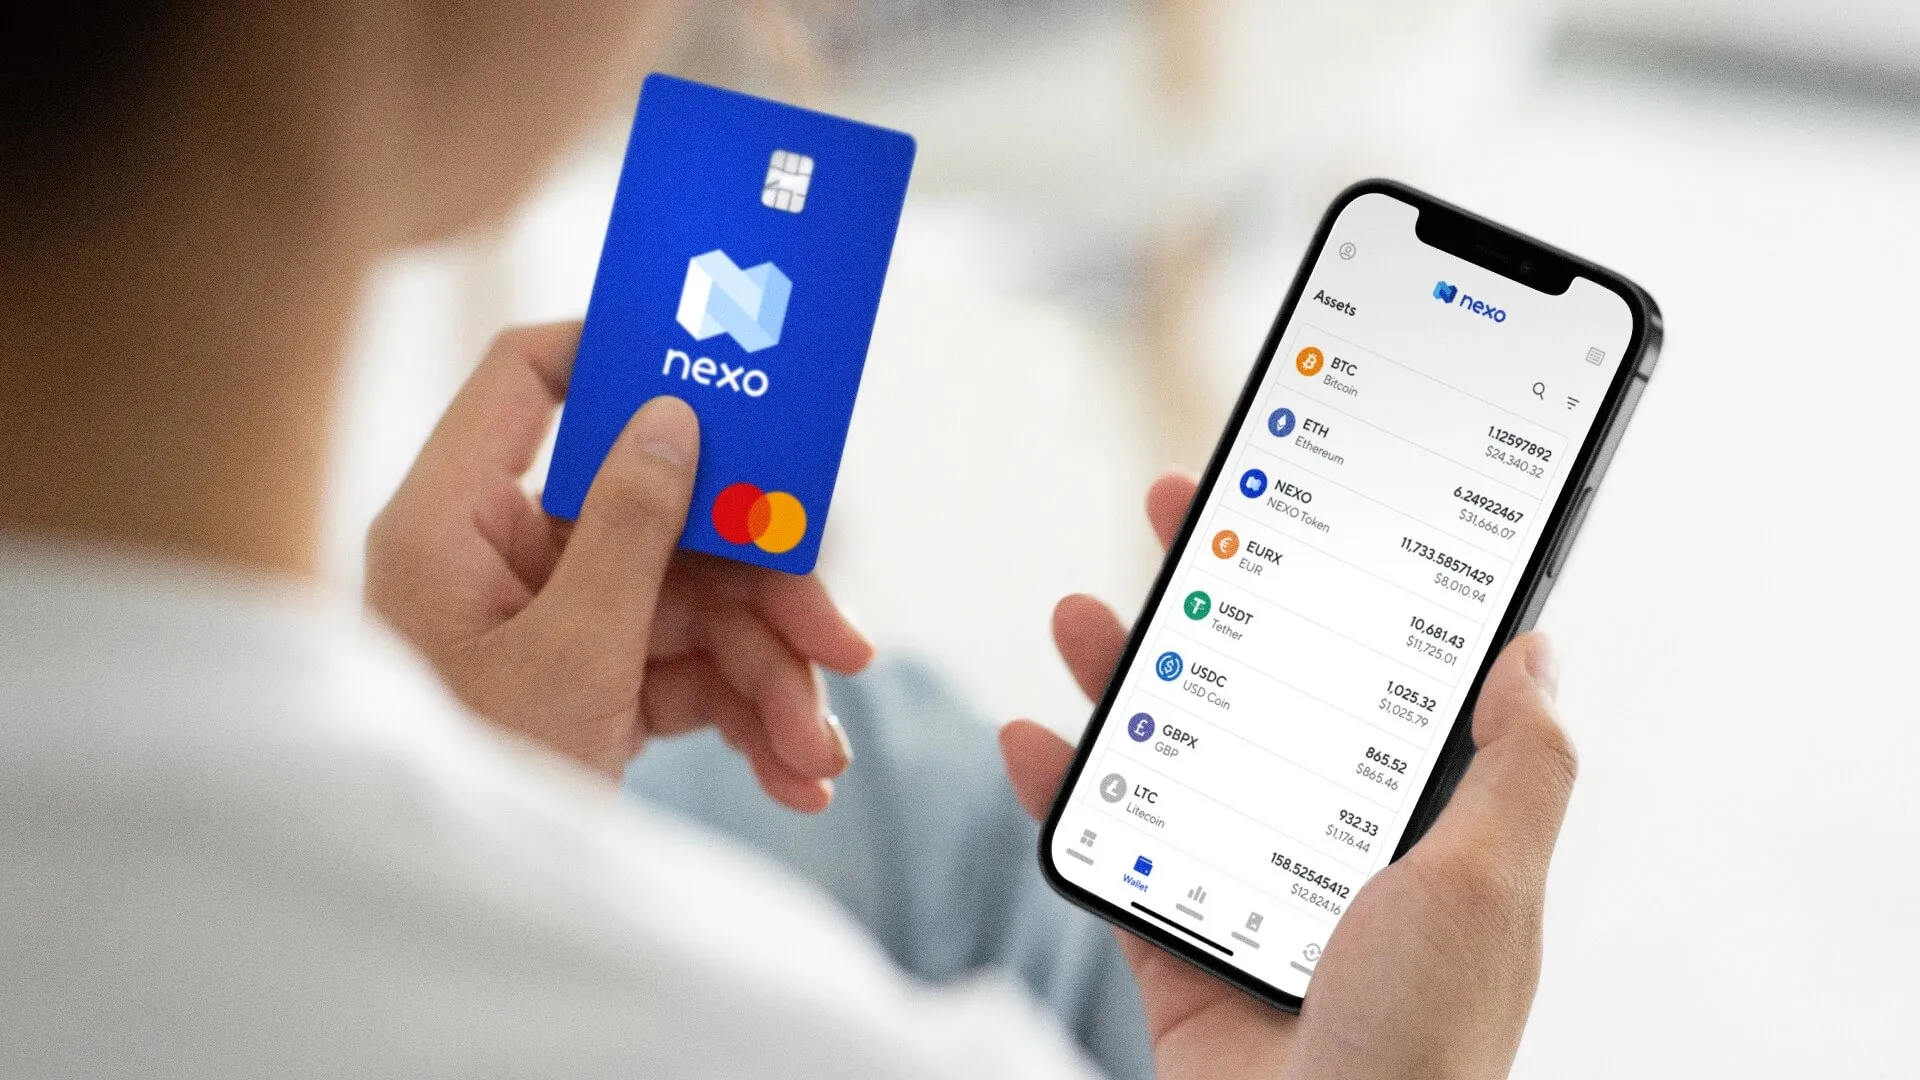 A person holding the Nexo card in their left hand and a mobile phone with open Nexo app in the right hand.